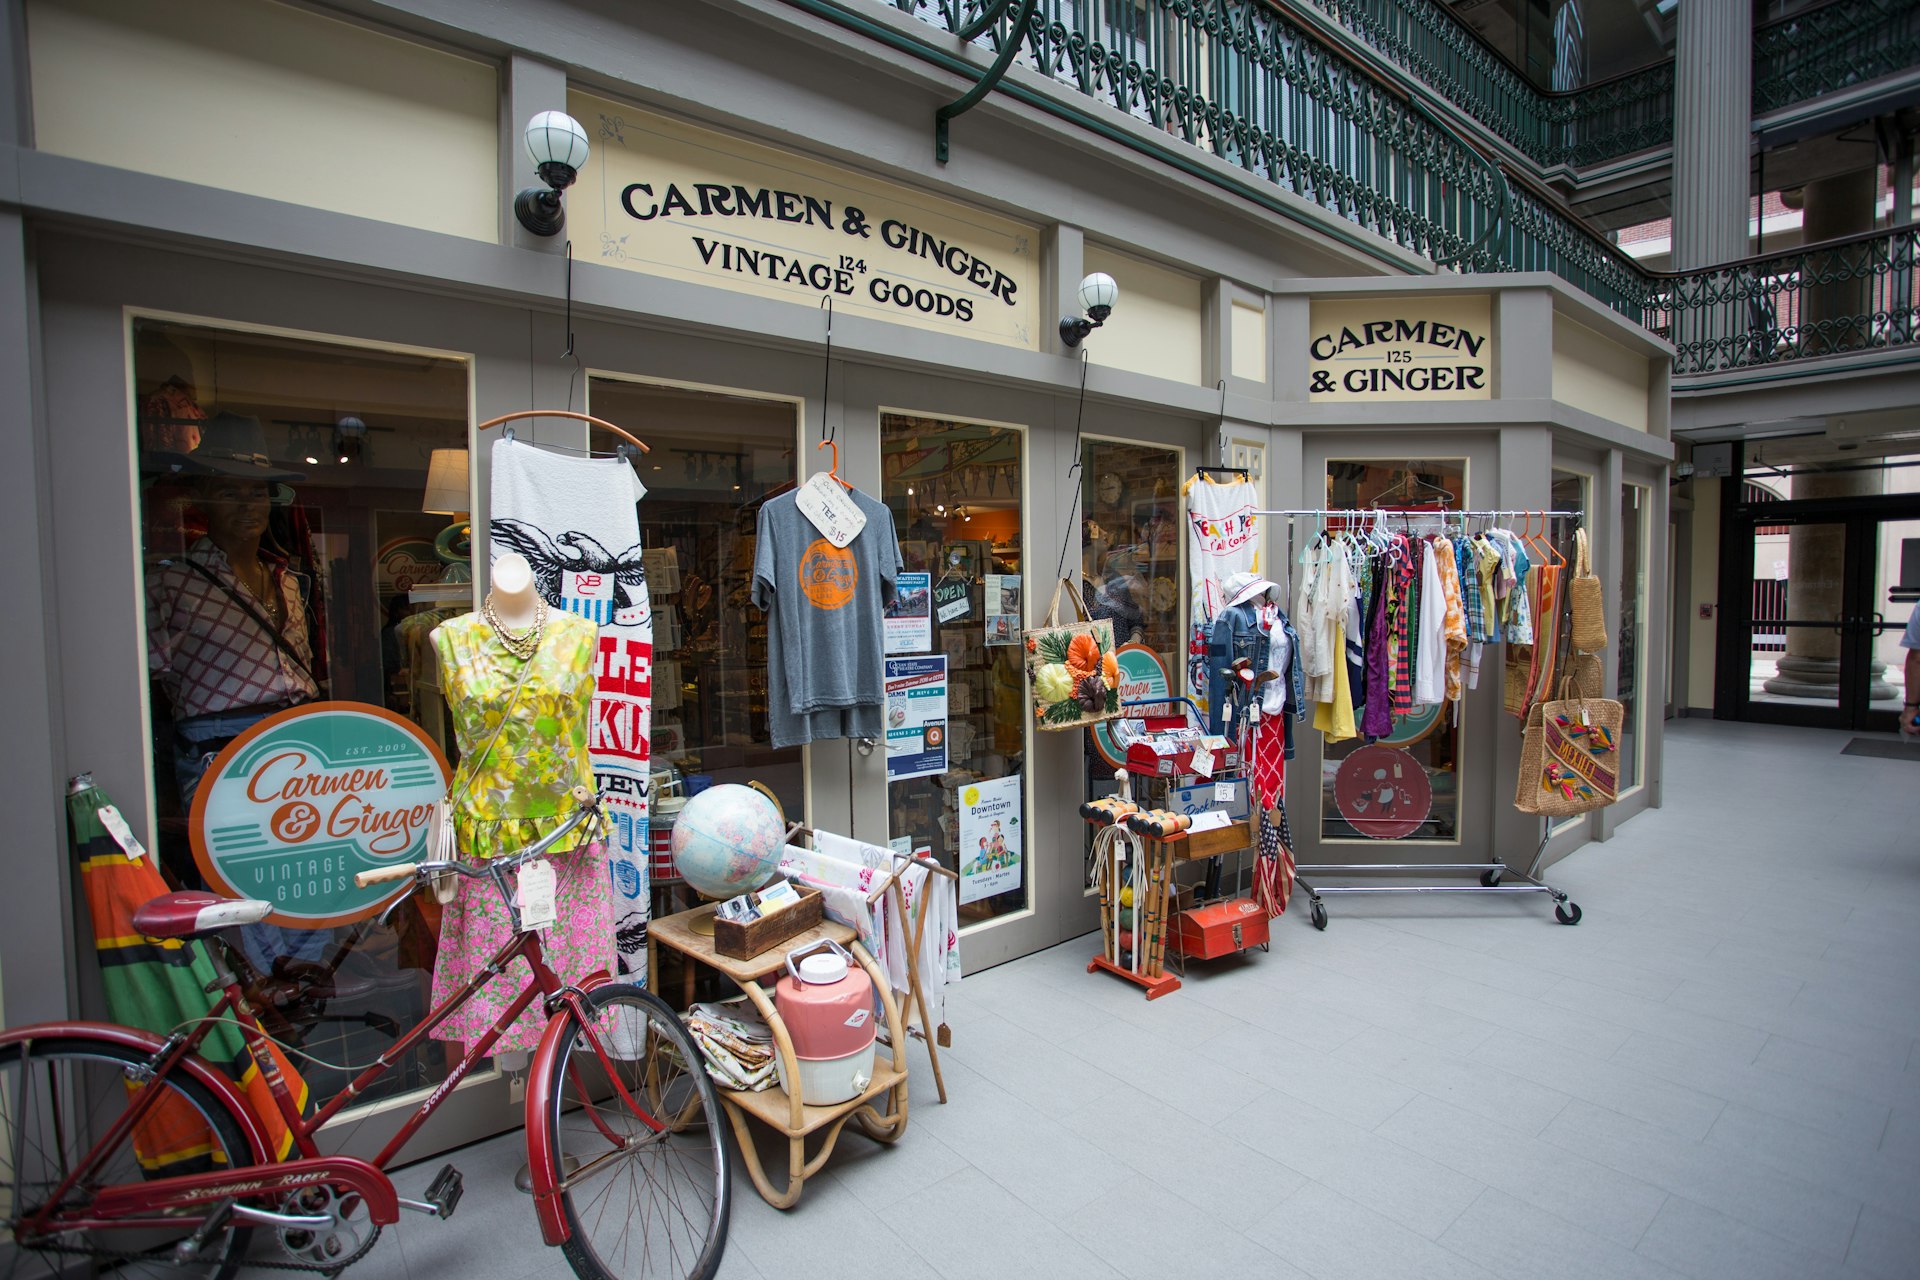 Facade of a vintage store with sign reading Carmen and Ginger and displays of dresses out front